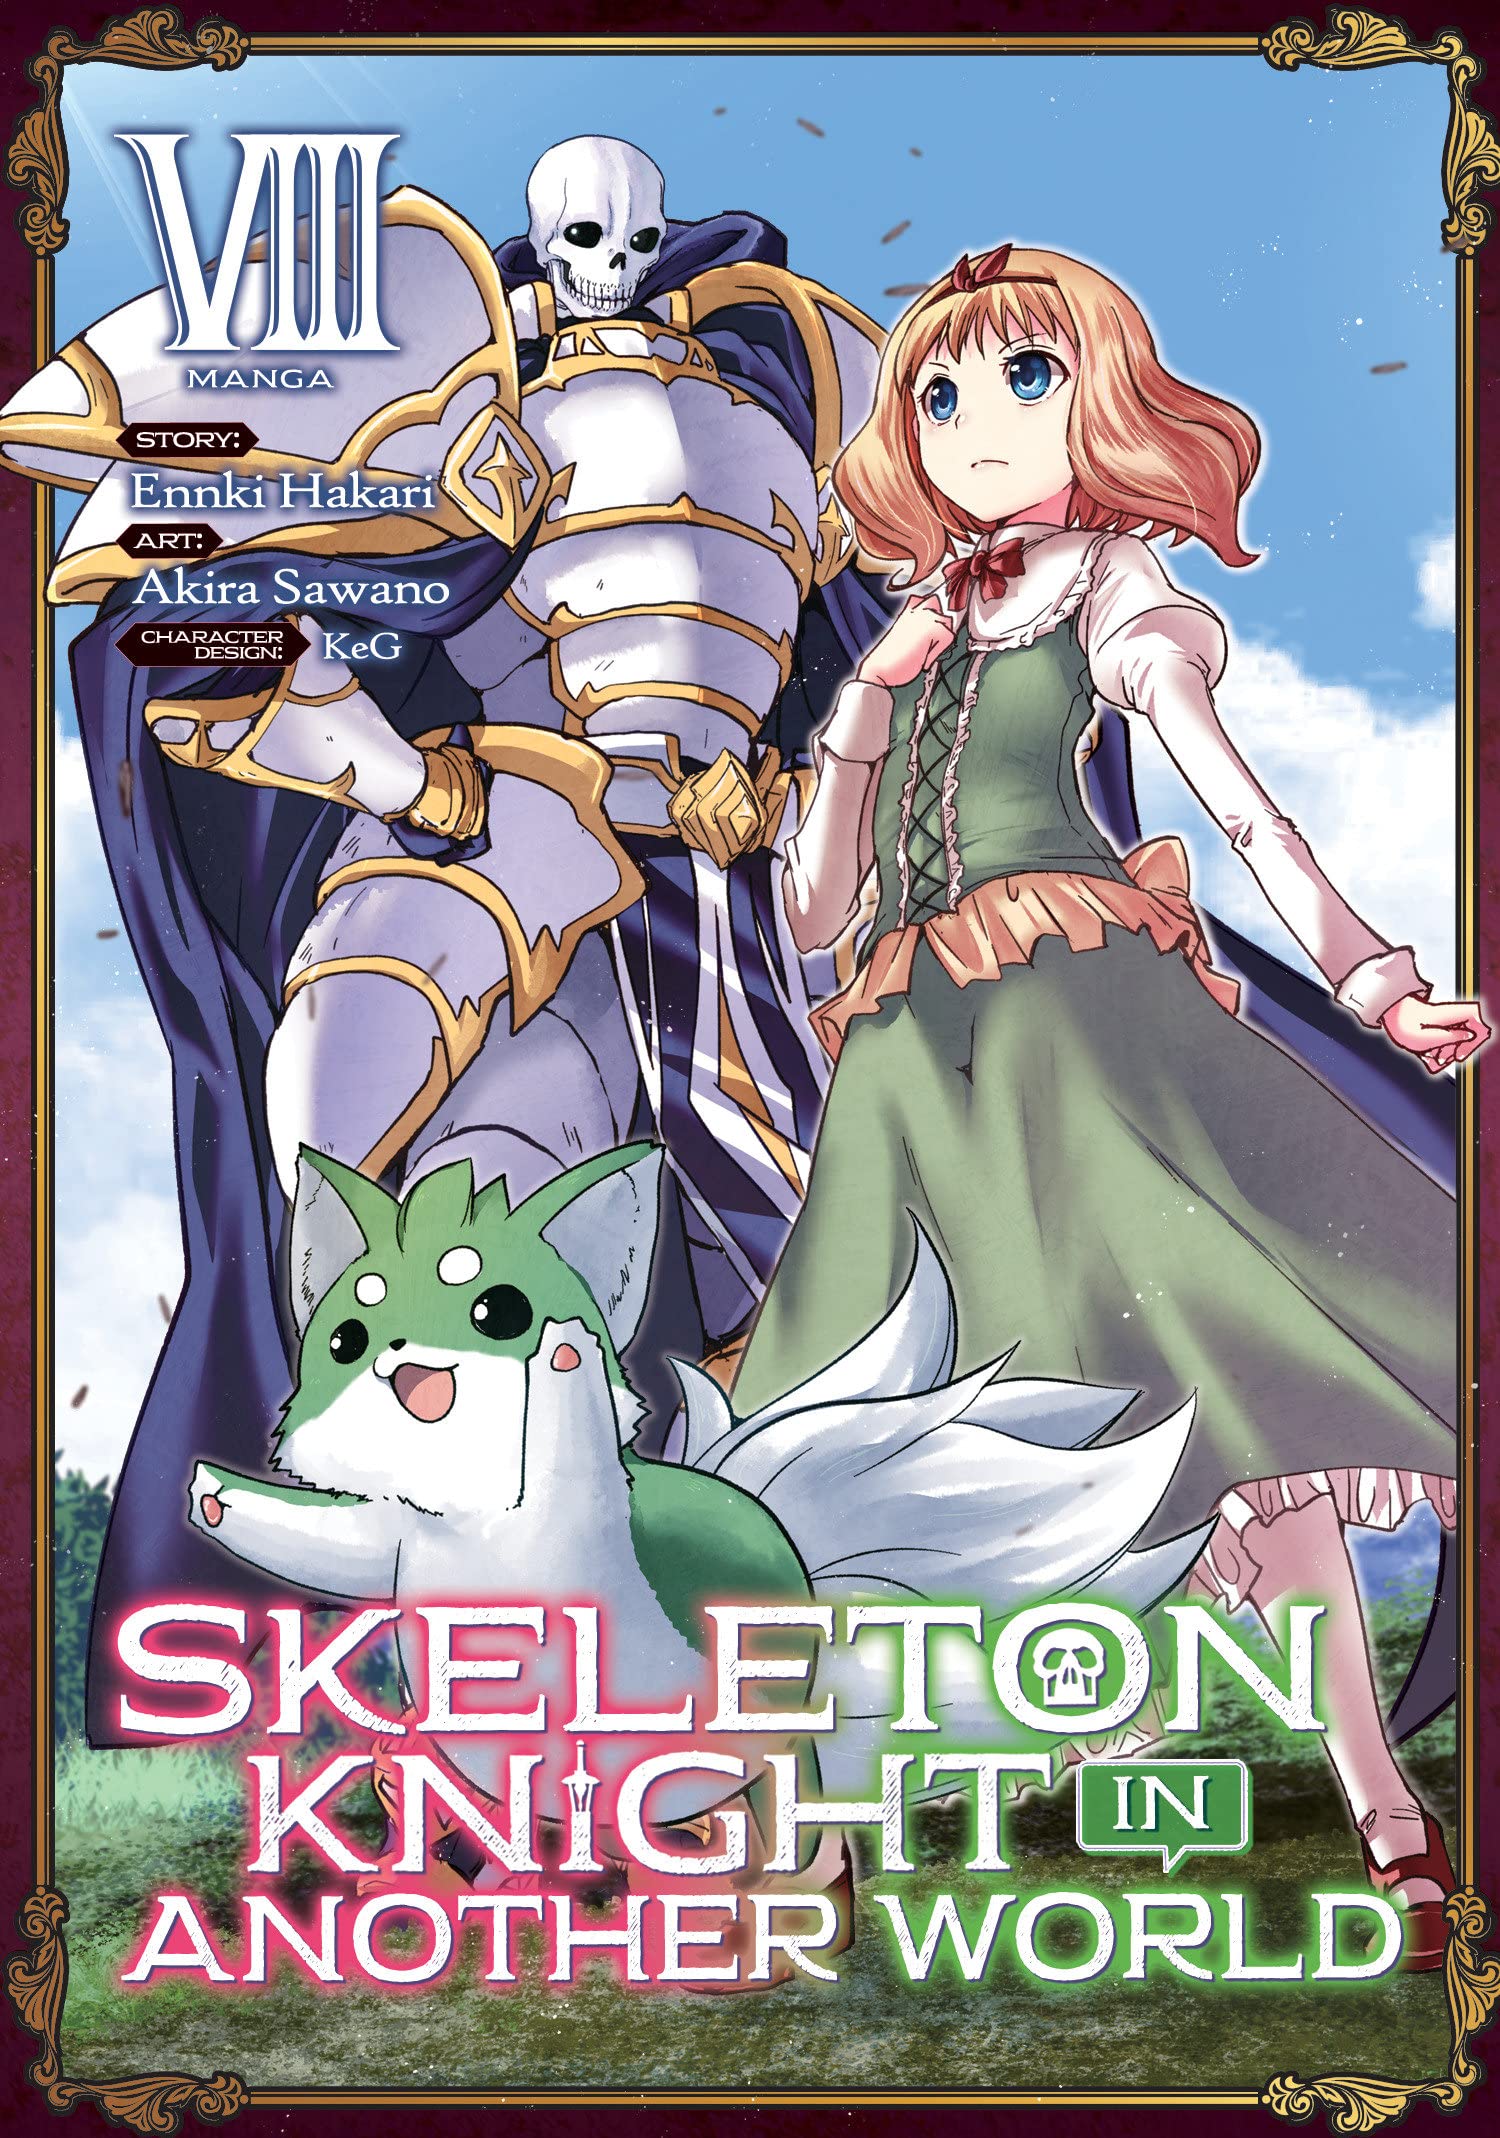 Skeleton Knight in Another World (Manga) Vol. 08